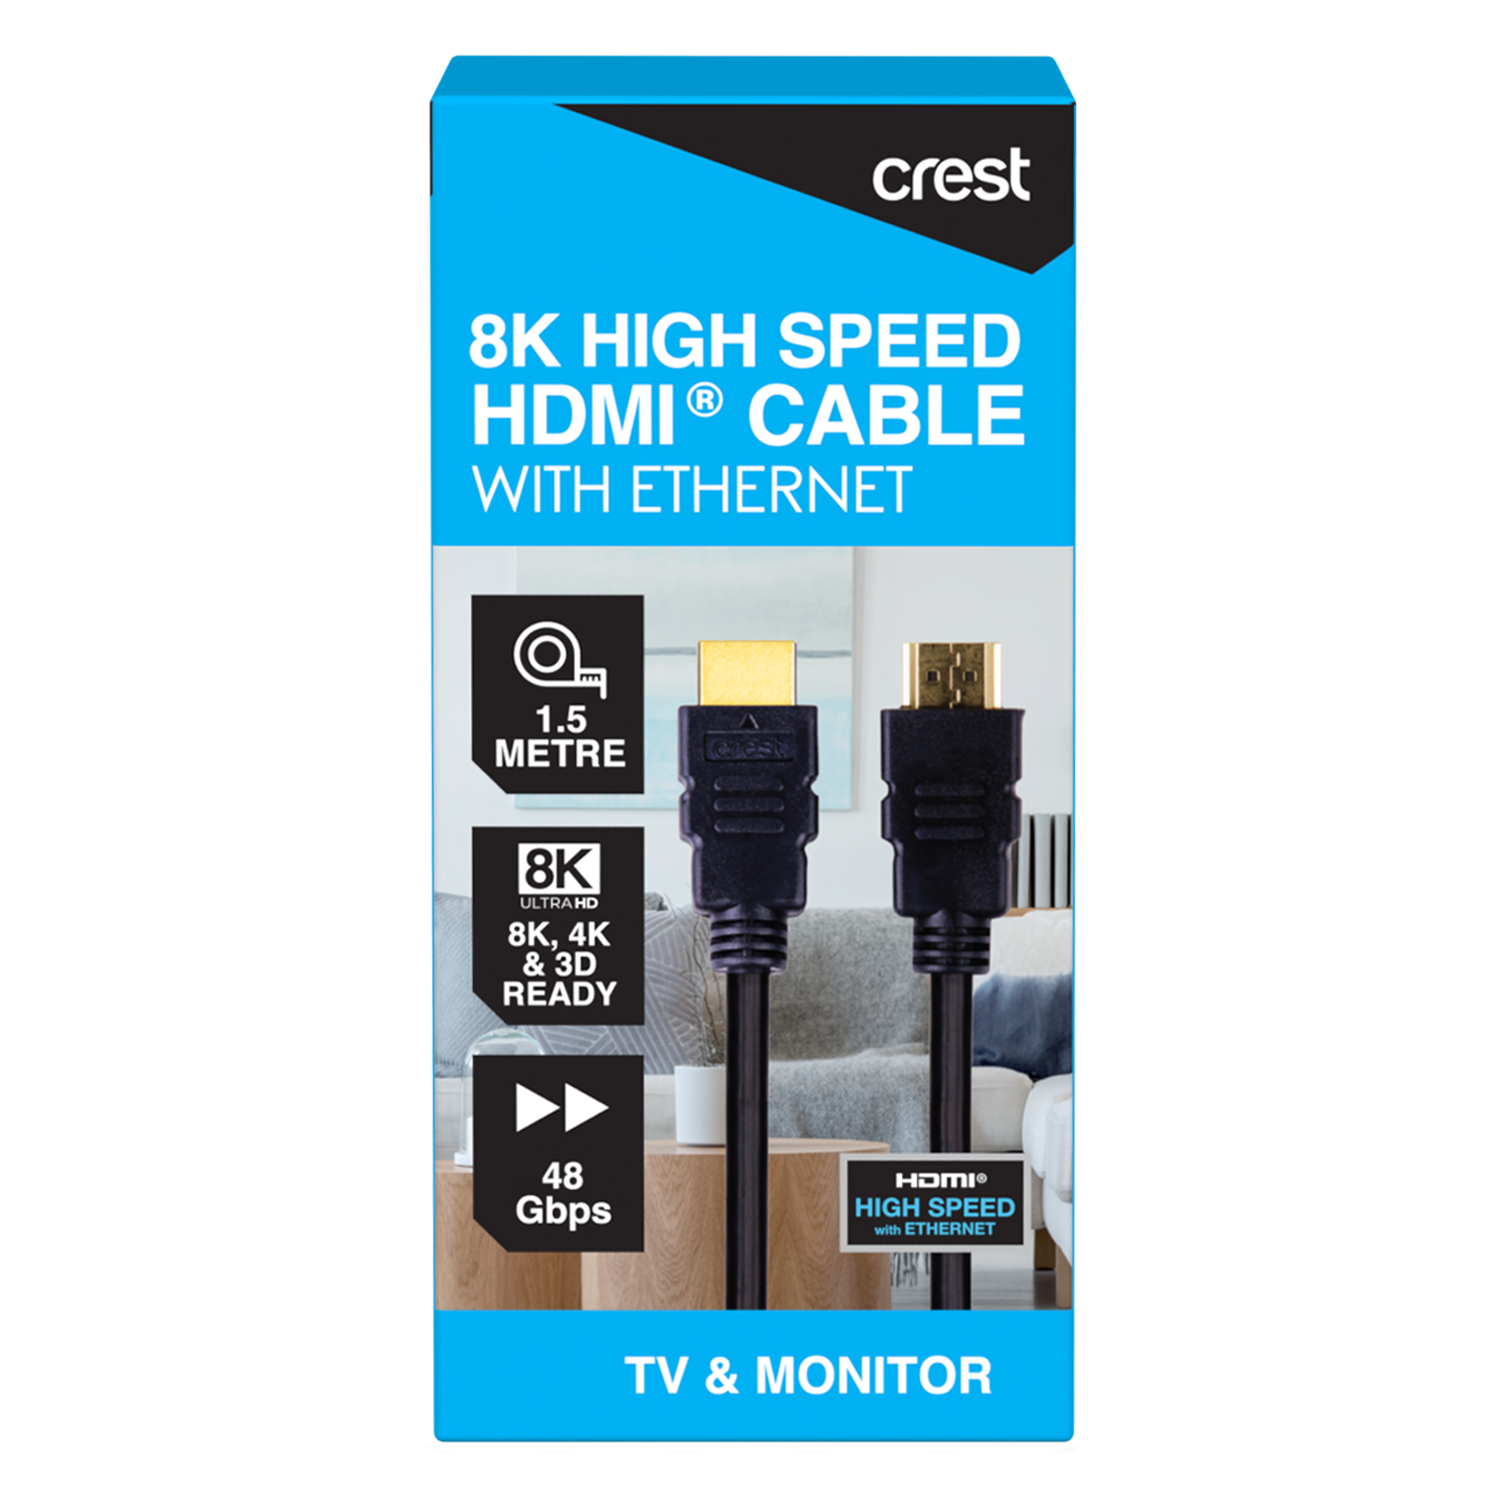 8K HDMI Cable With Ethernet 48Gbps 1.5M